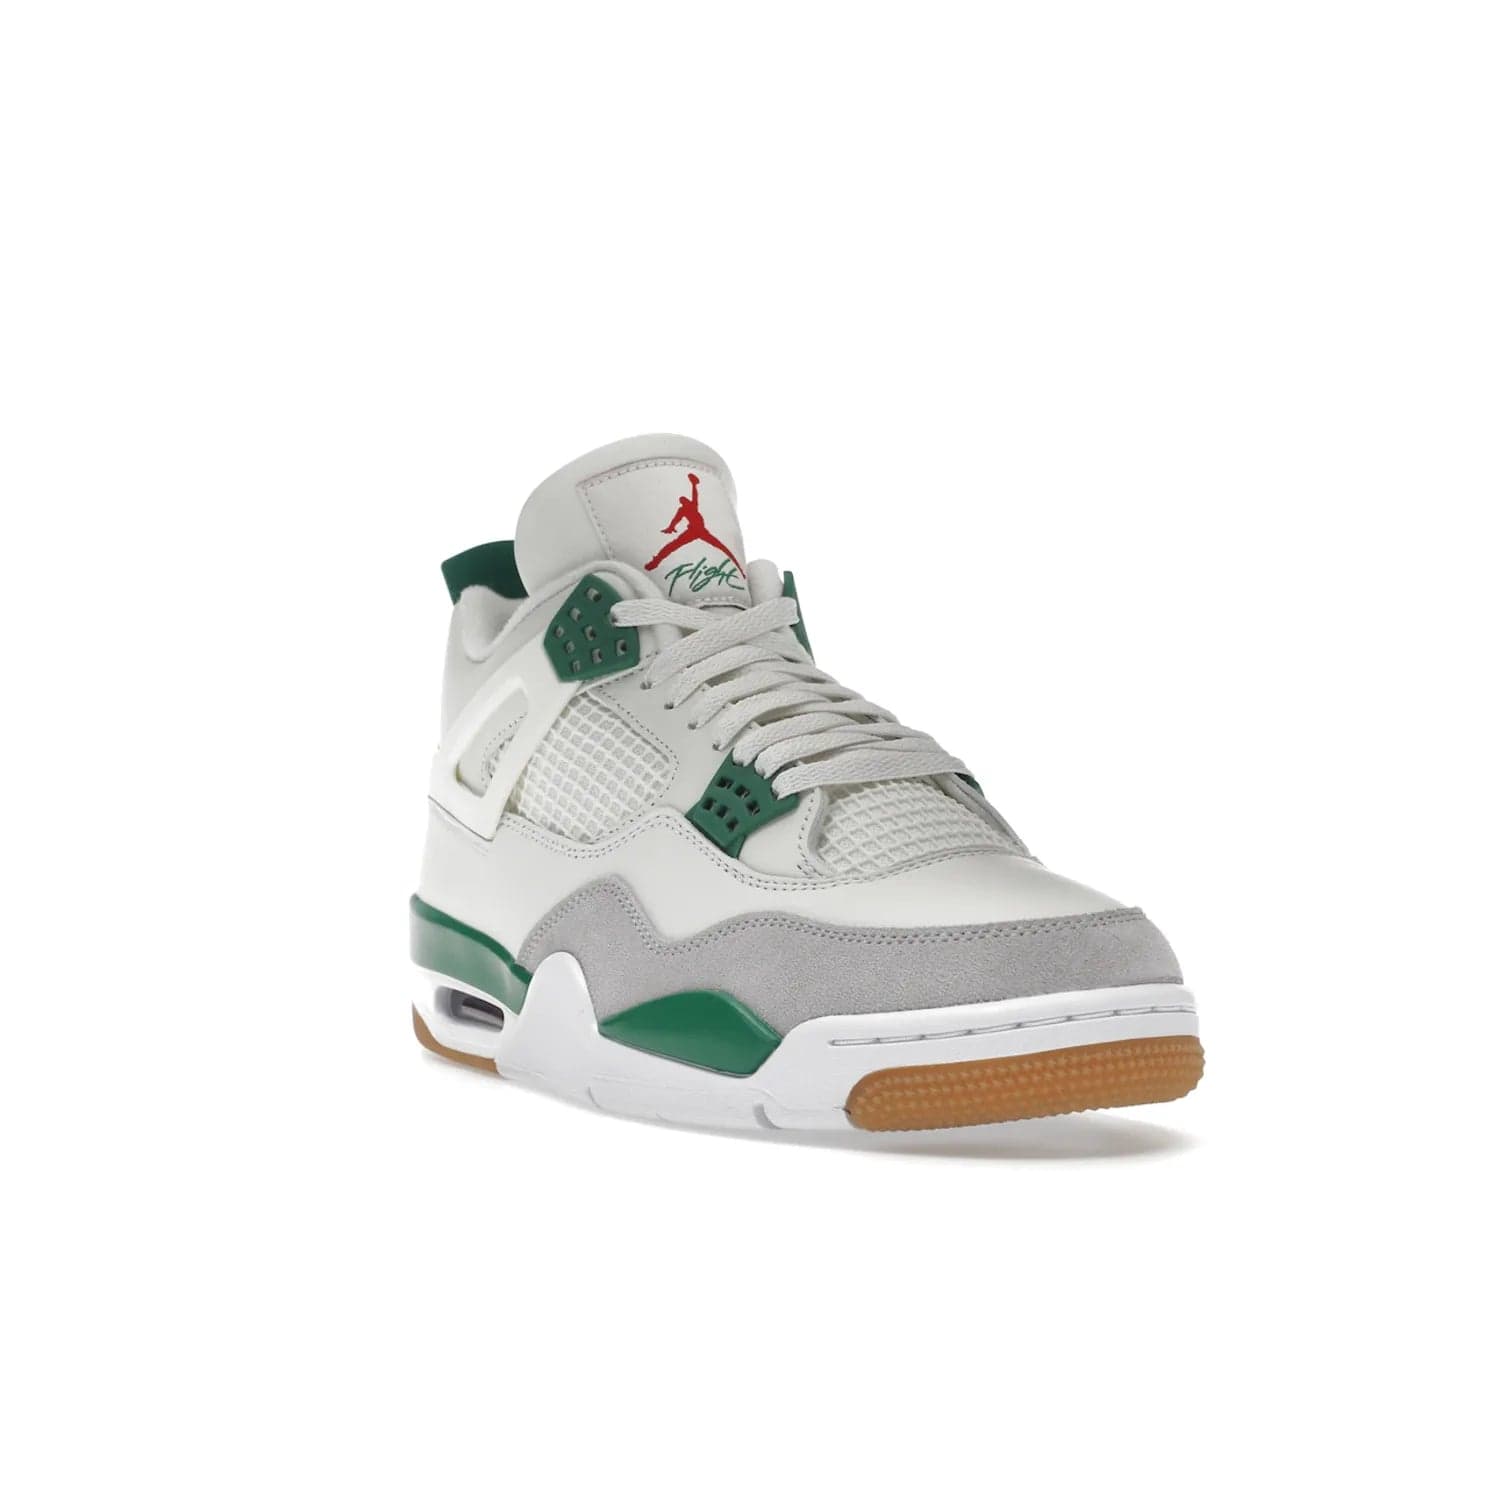 Jordan 4 Retro SB Pine Green - Image 7 - Only at www.BallersClubKickz.com - A white leather upper combined with a Neutral Grey suede mudguard gives this limited Air Jordan 4 Retro SB Pine Green sneaker its unmistakable style. Released March 20, 2023, the Jordan 4 Retro SB features a white and Pine Green midsole plus a red air unit with a gum outsole for grip. The perfect blend of Nike SB skateboarding and Jordan 4 classic design.